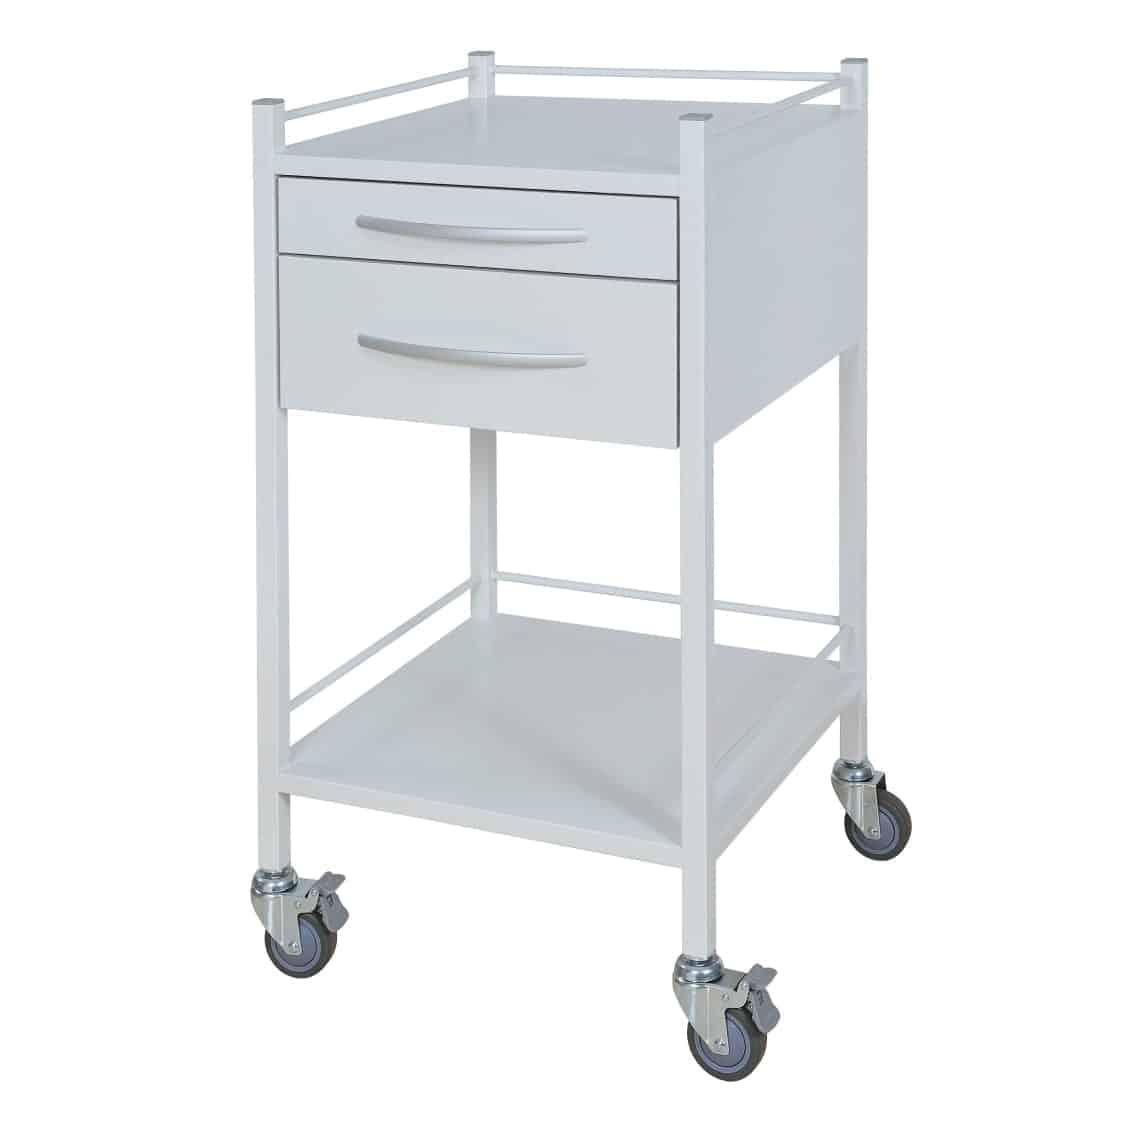 Product Instrument Trolley with Drawers - Agile Medical image